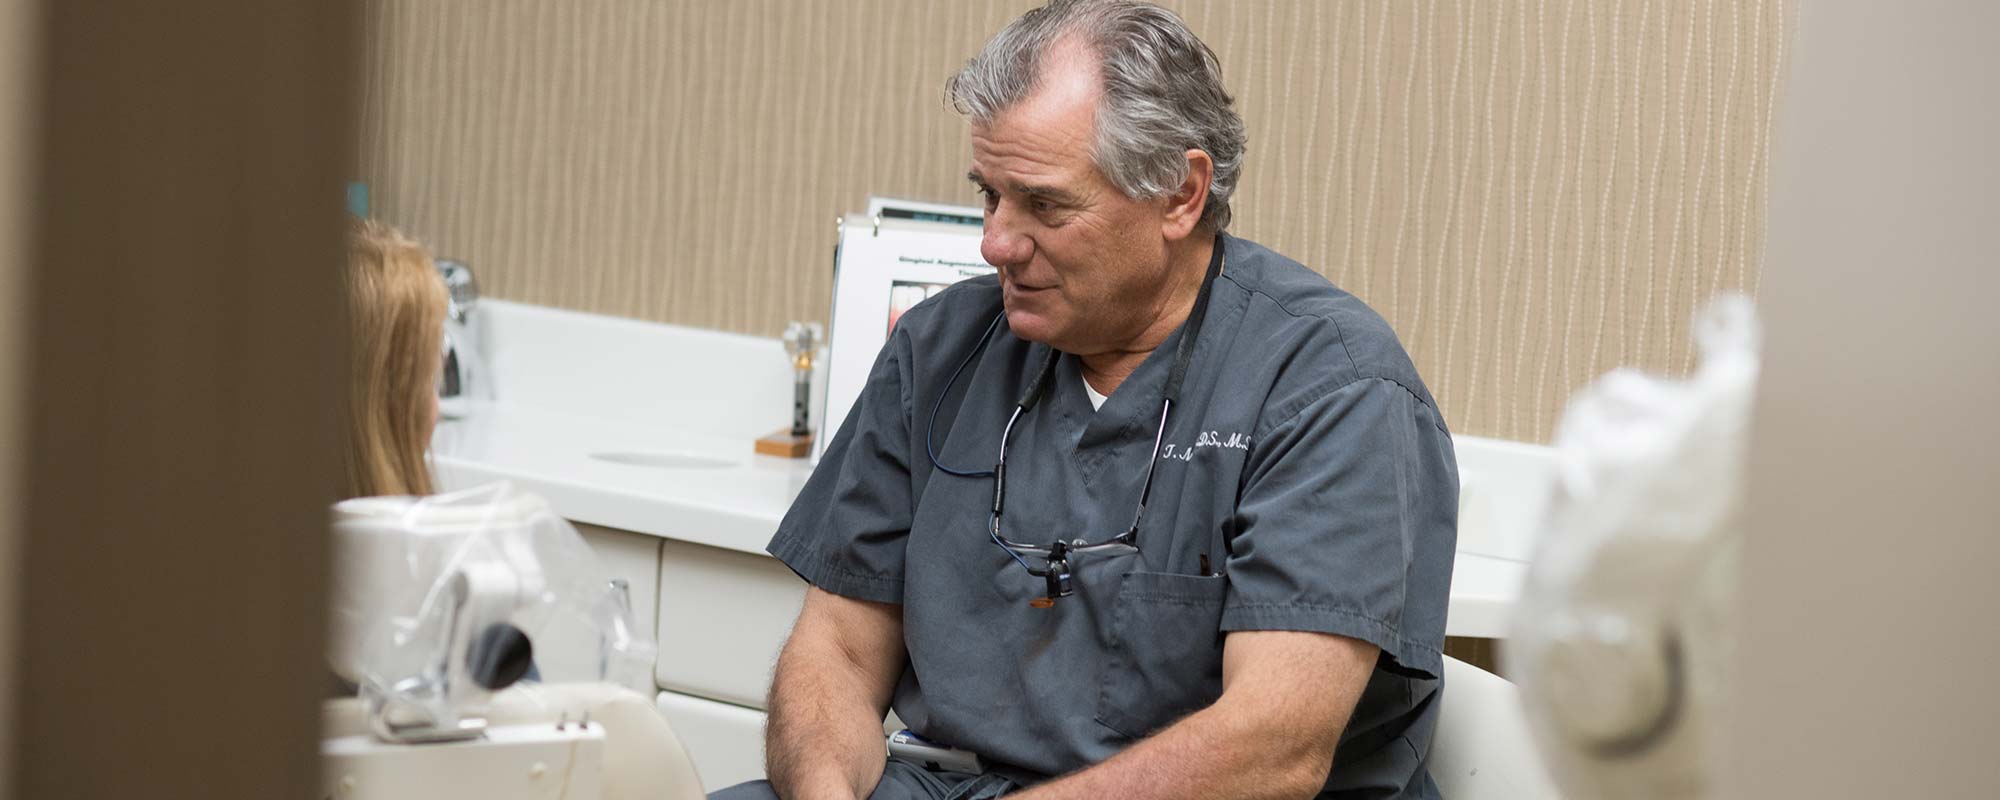 Learn about the periodontics services offered at Park Dental Specialists